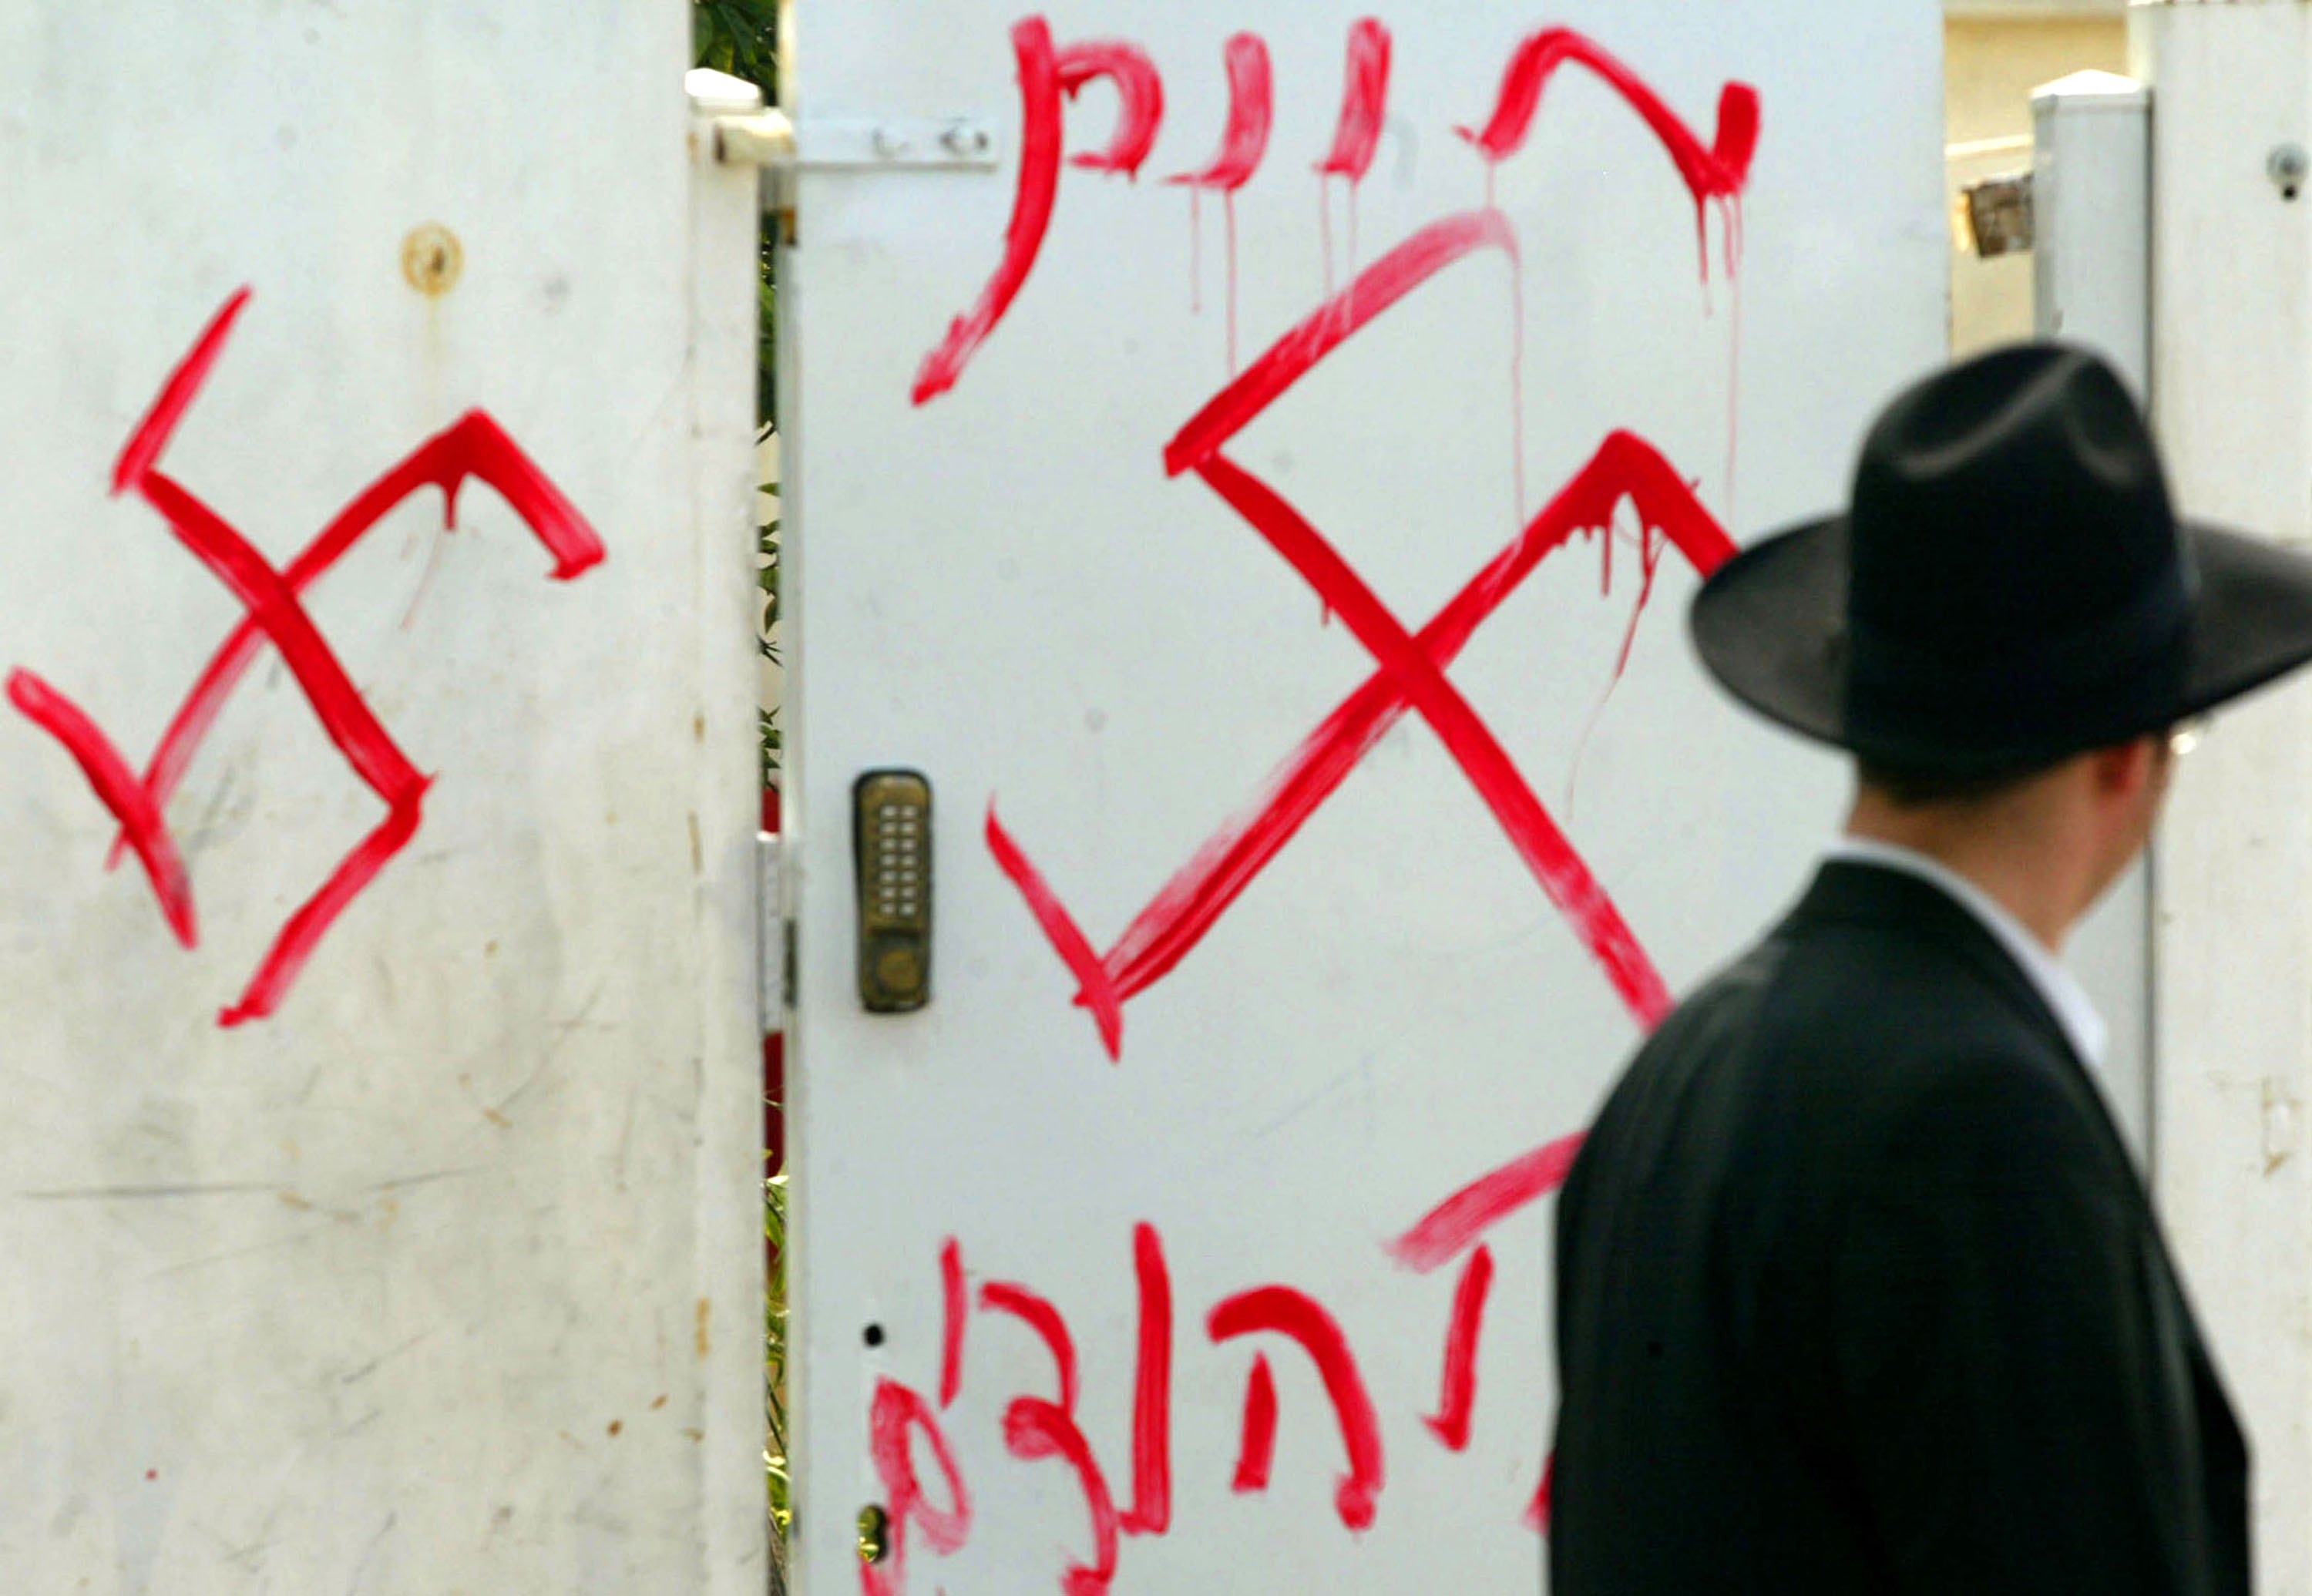 Synagogue Walls Desecrated With Anti-Semitic Graffiti